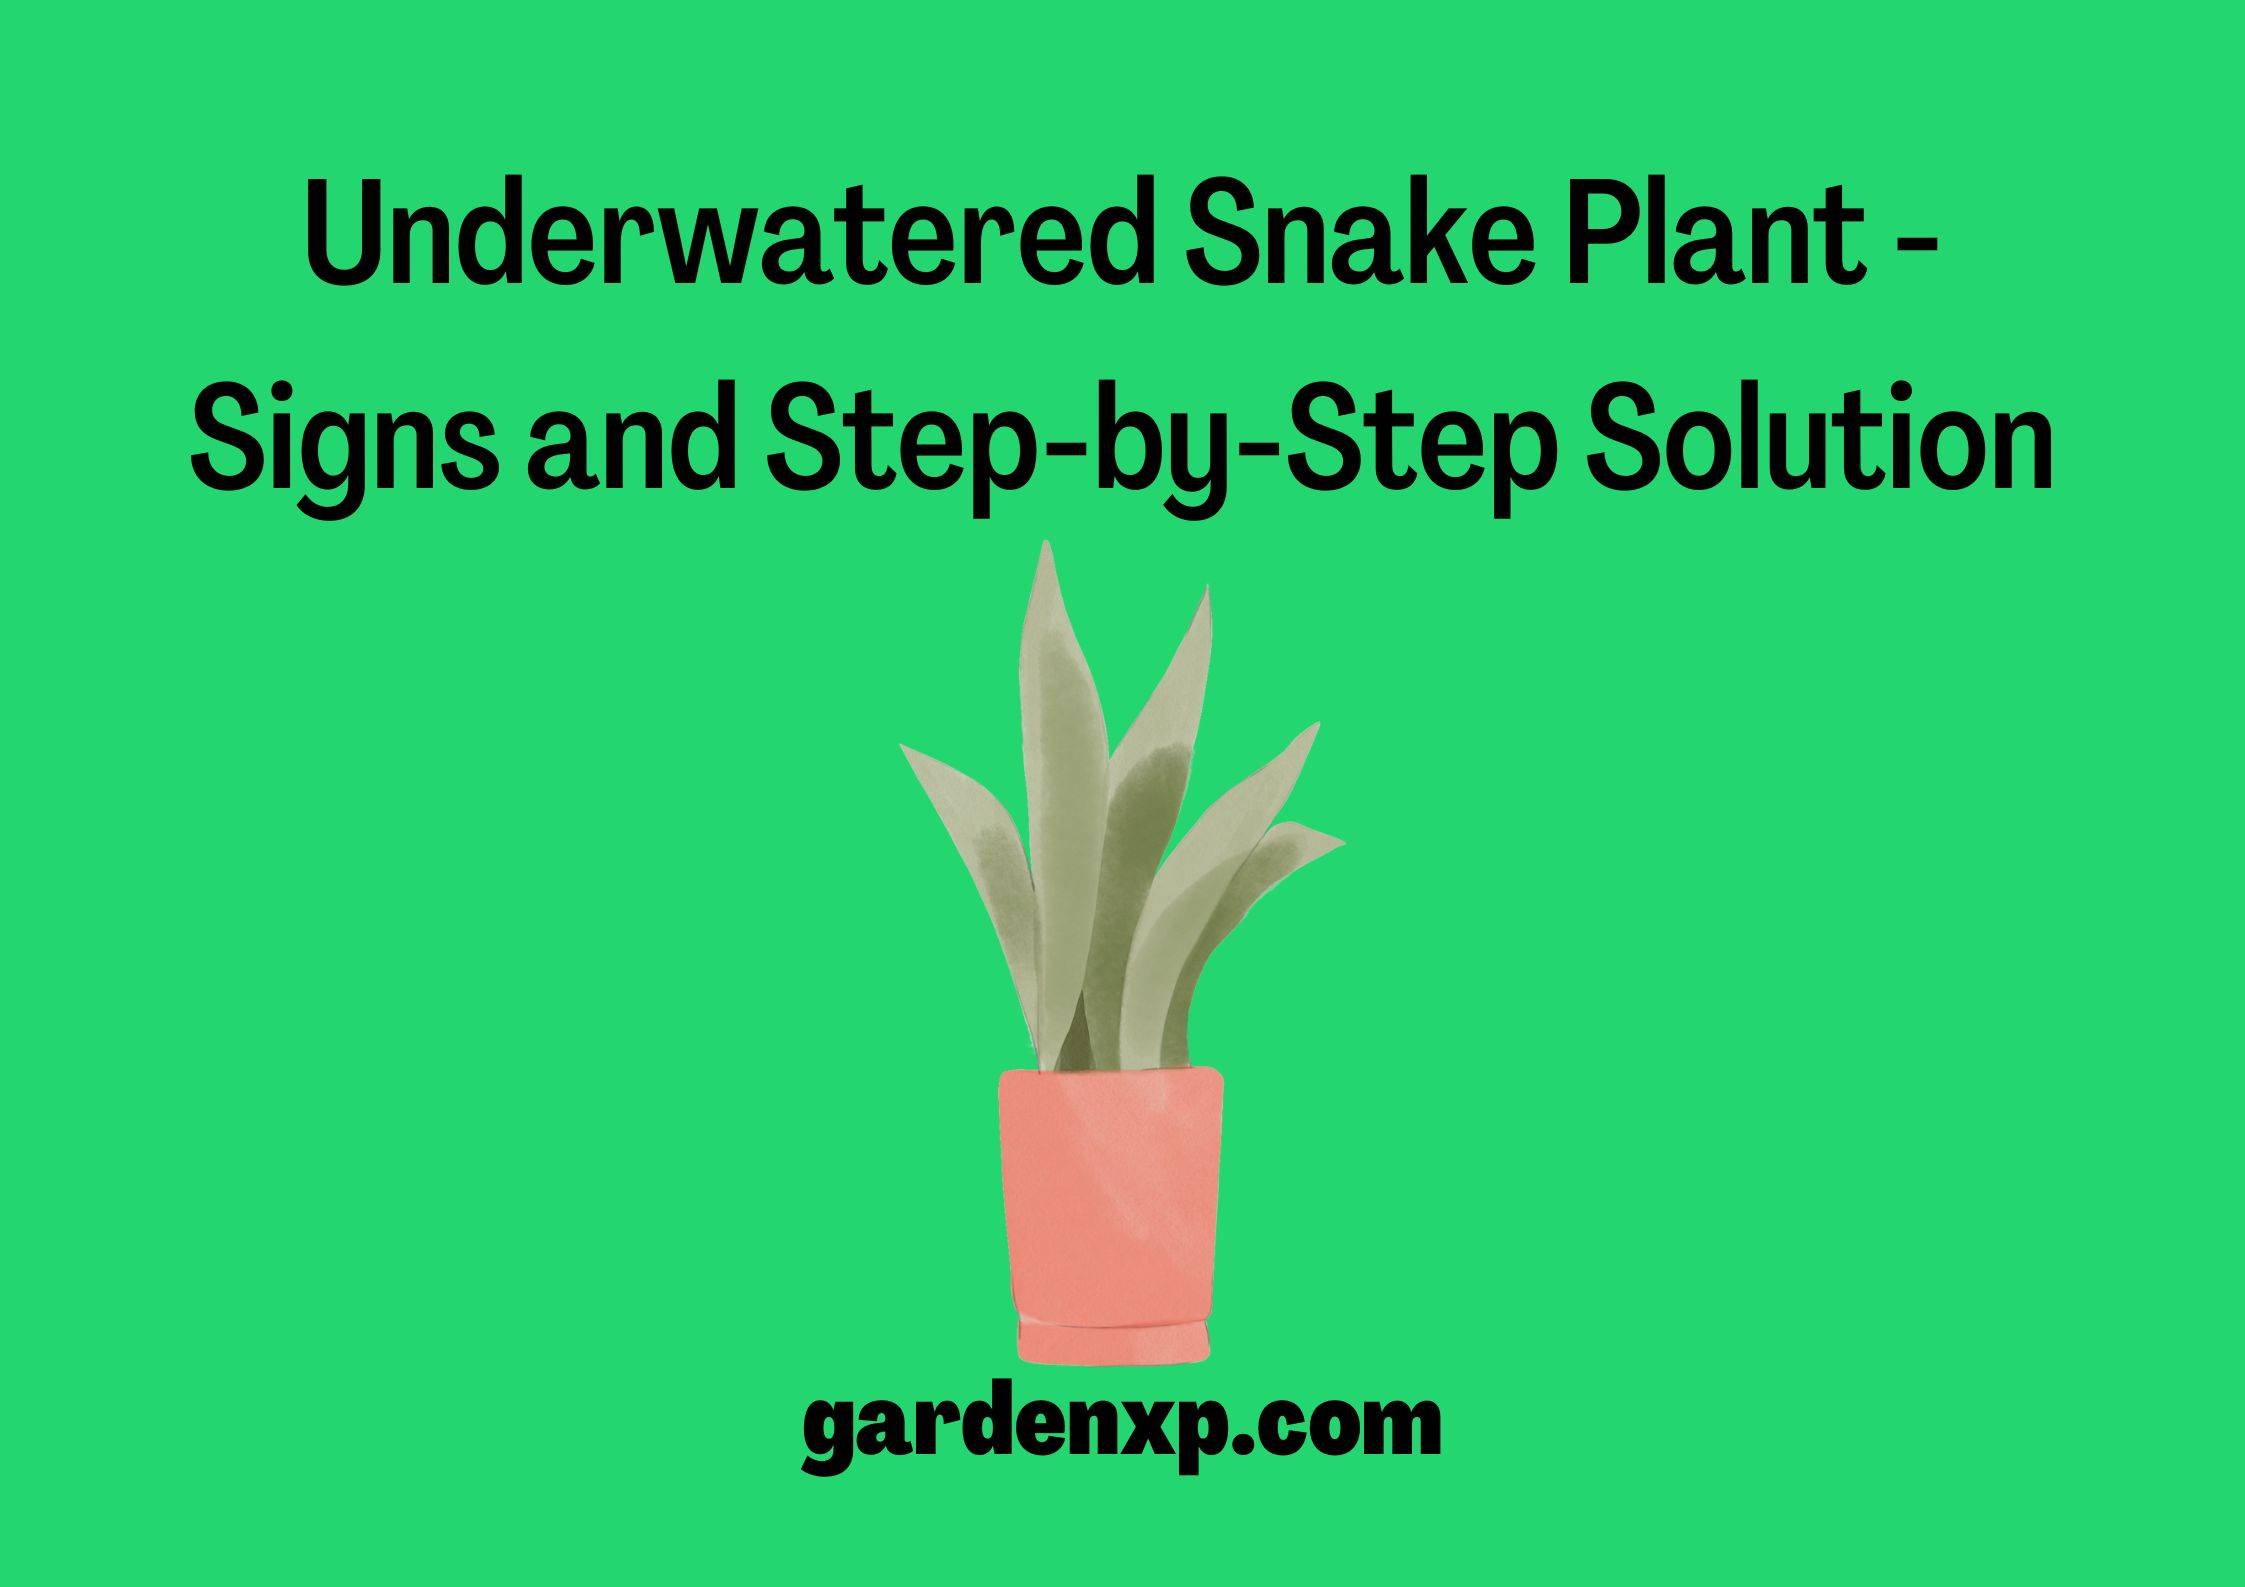 Underwatered Snake Plant - Signs and Step-by-Step Solution